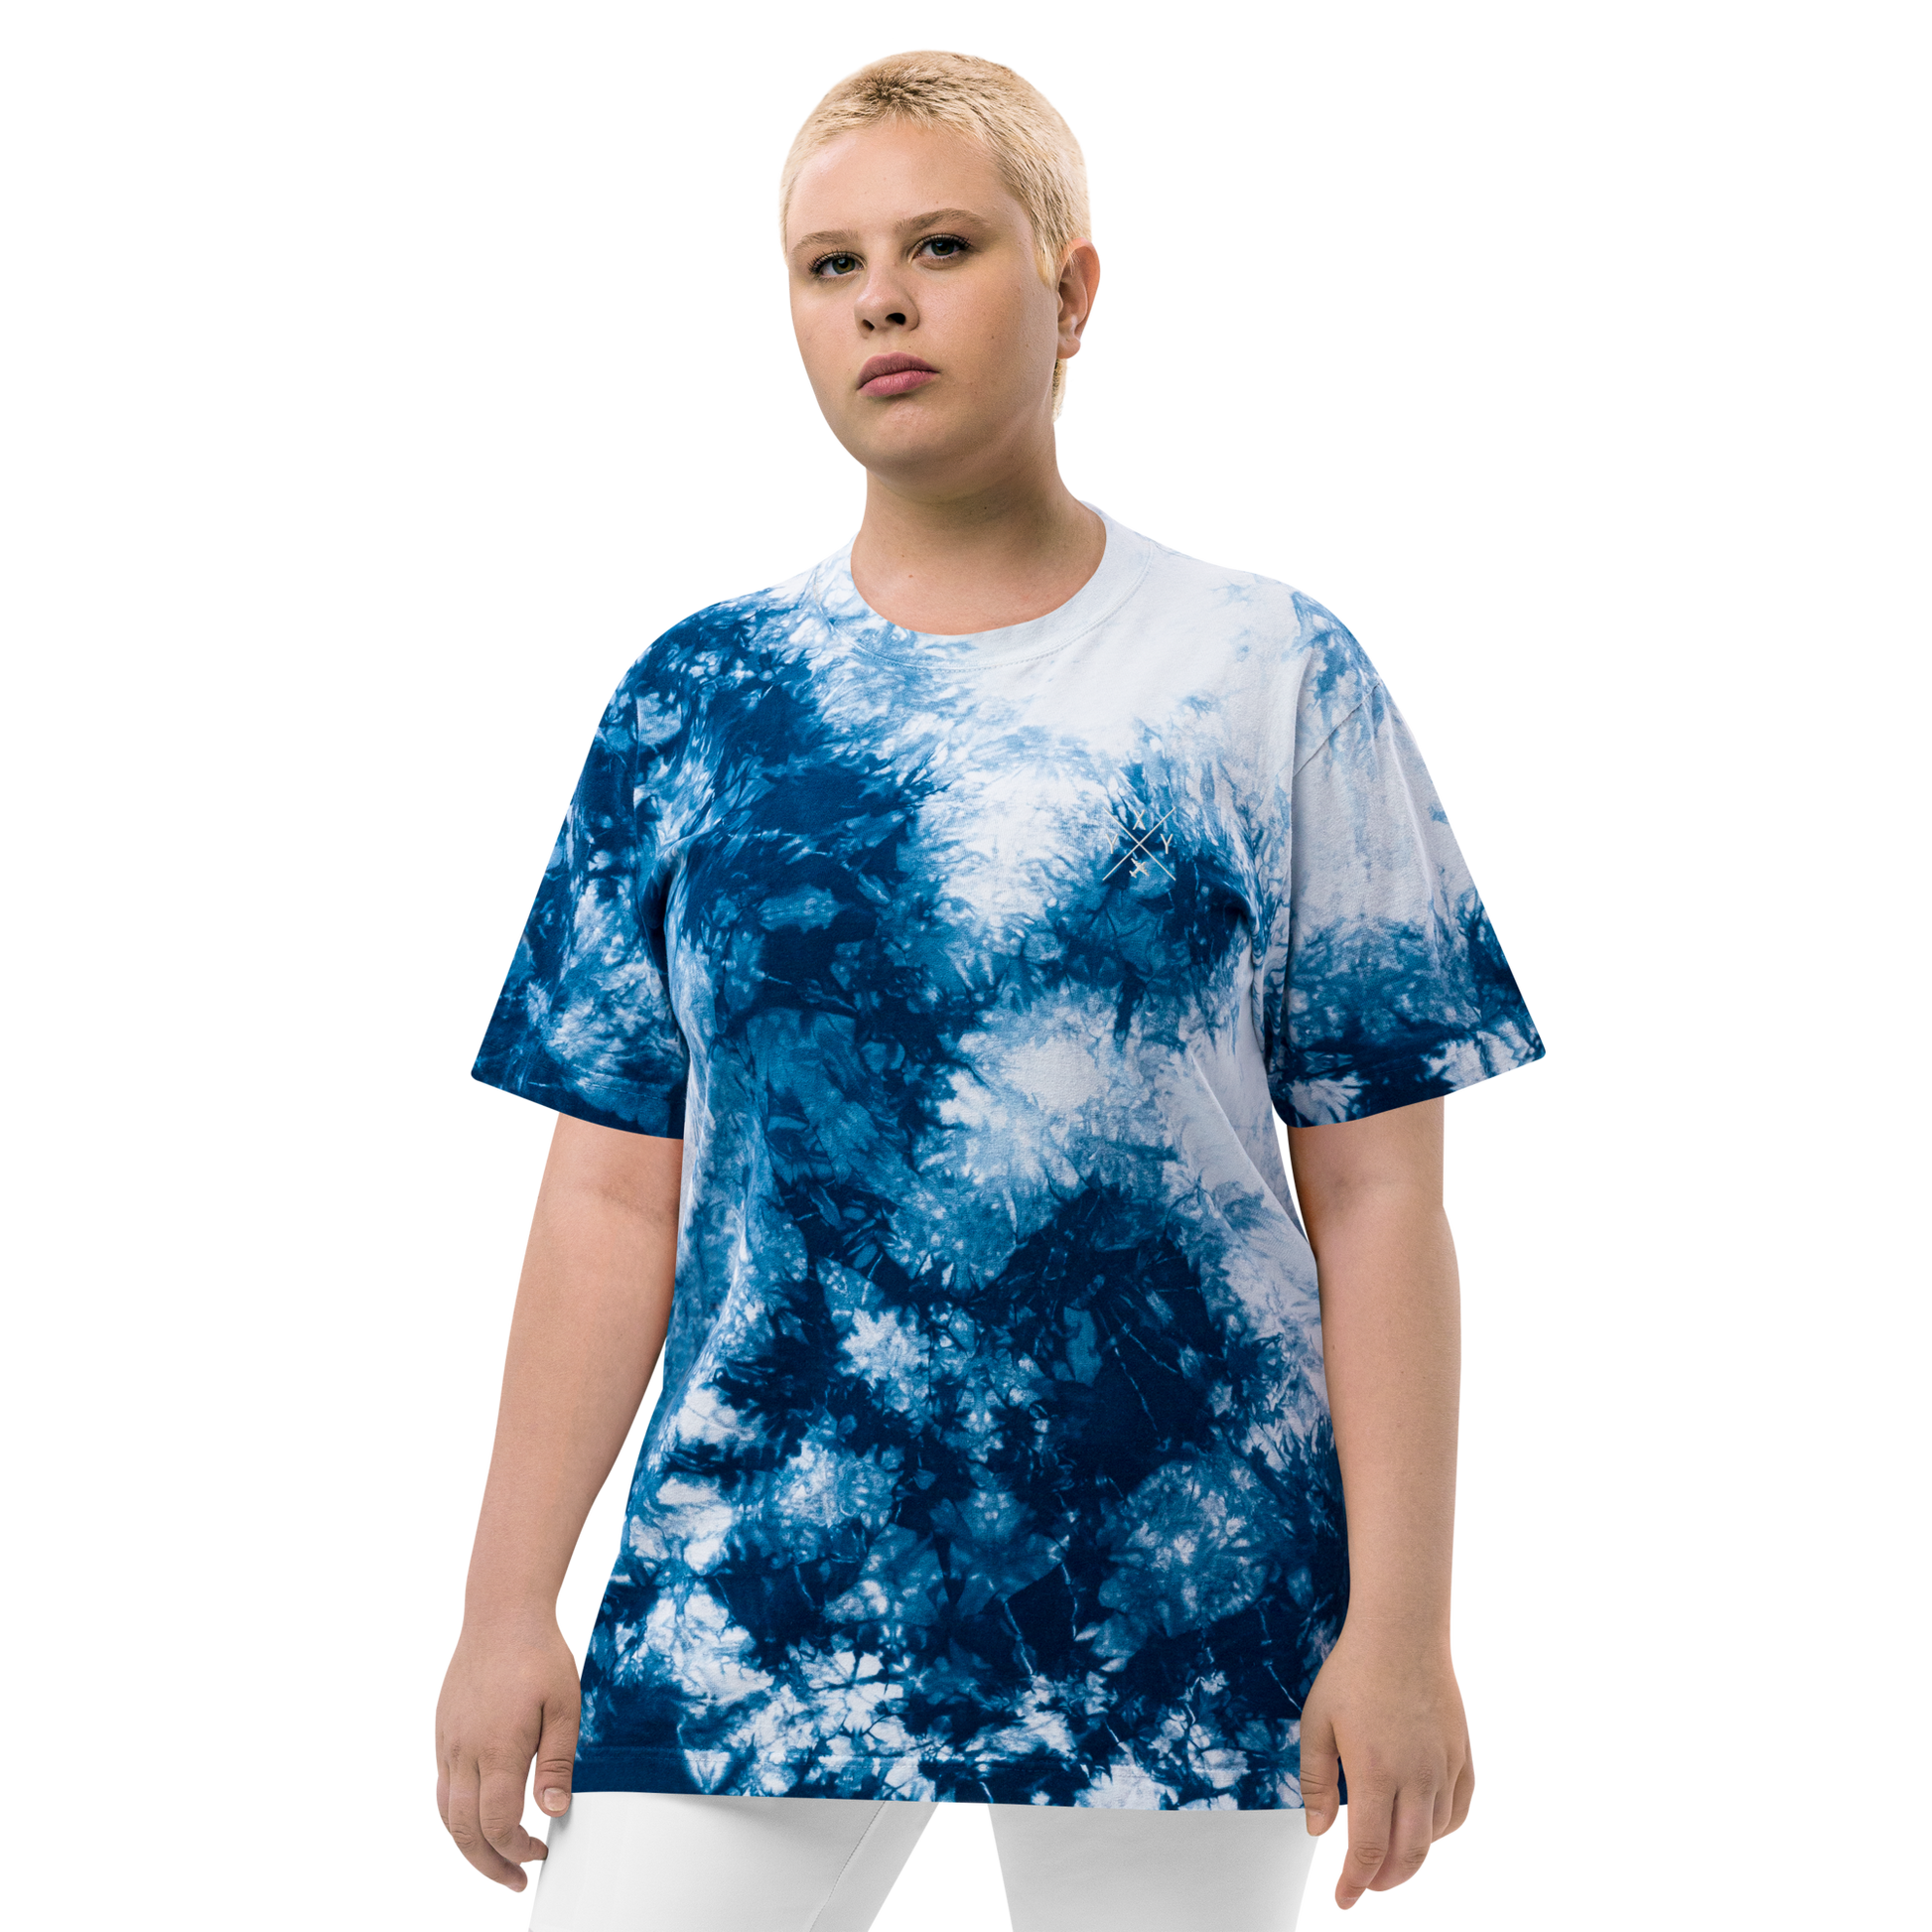 YHM Designs - YXY Whitehorse Oversized Tie-Dye T-Shirt - Crossed-X Design with Airport Code and Vintage Propliner - White Embroidery - Image 08